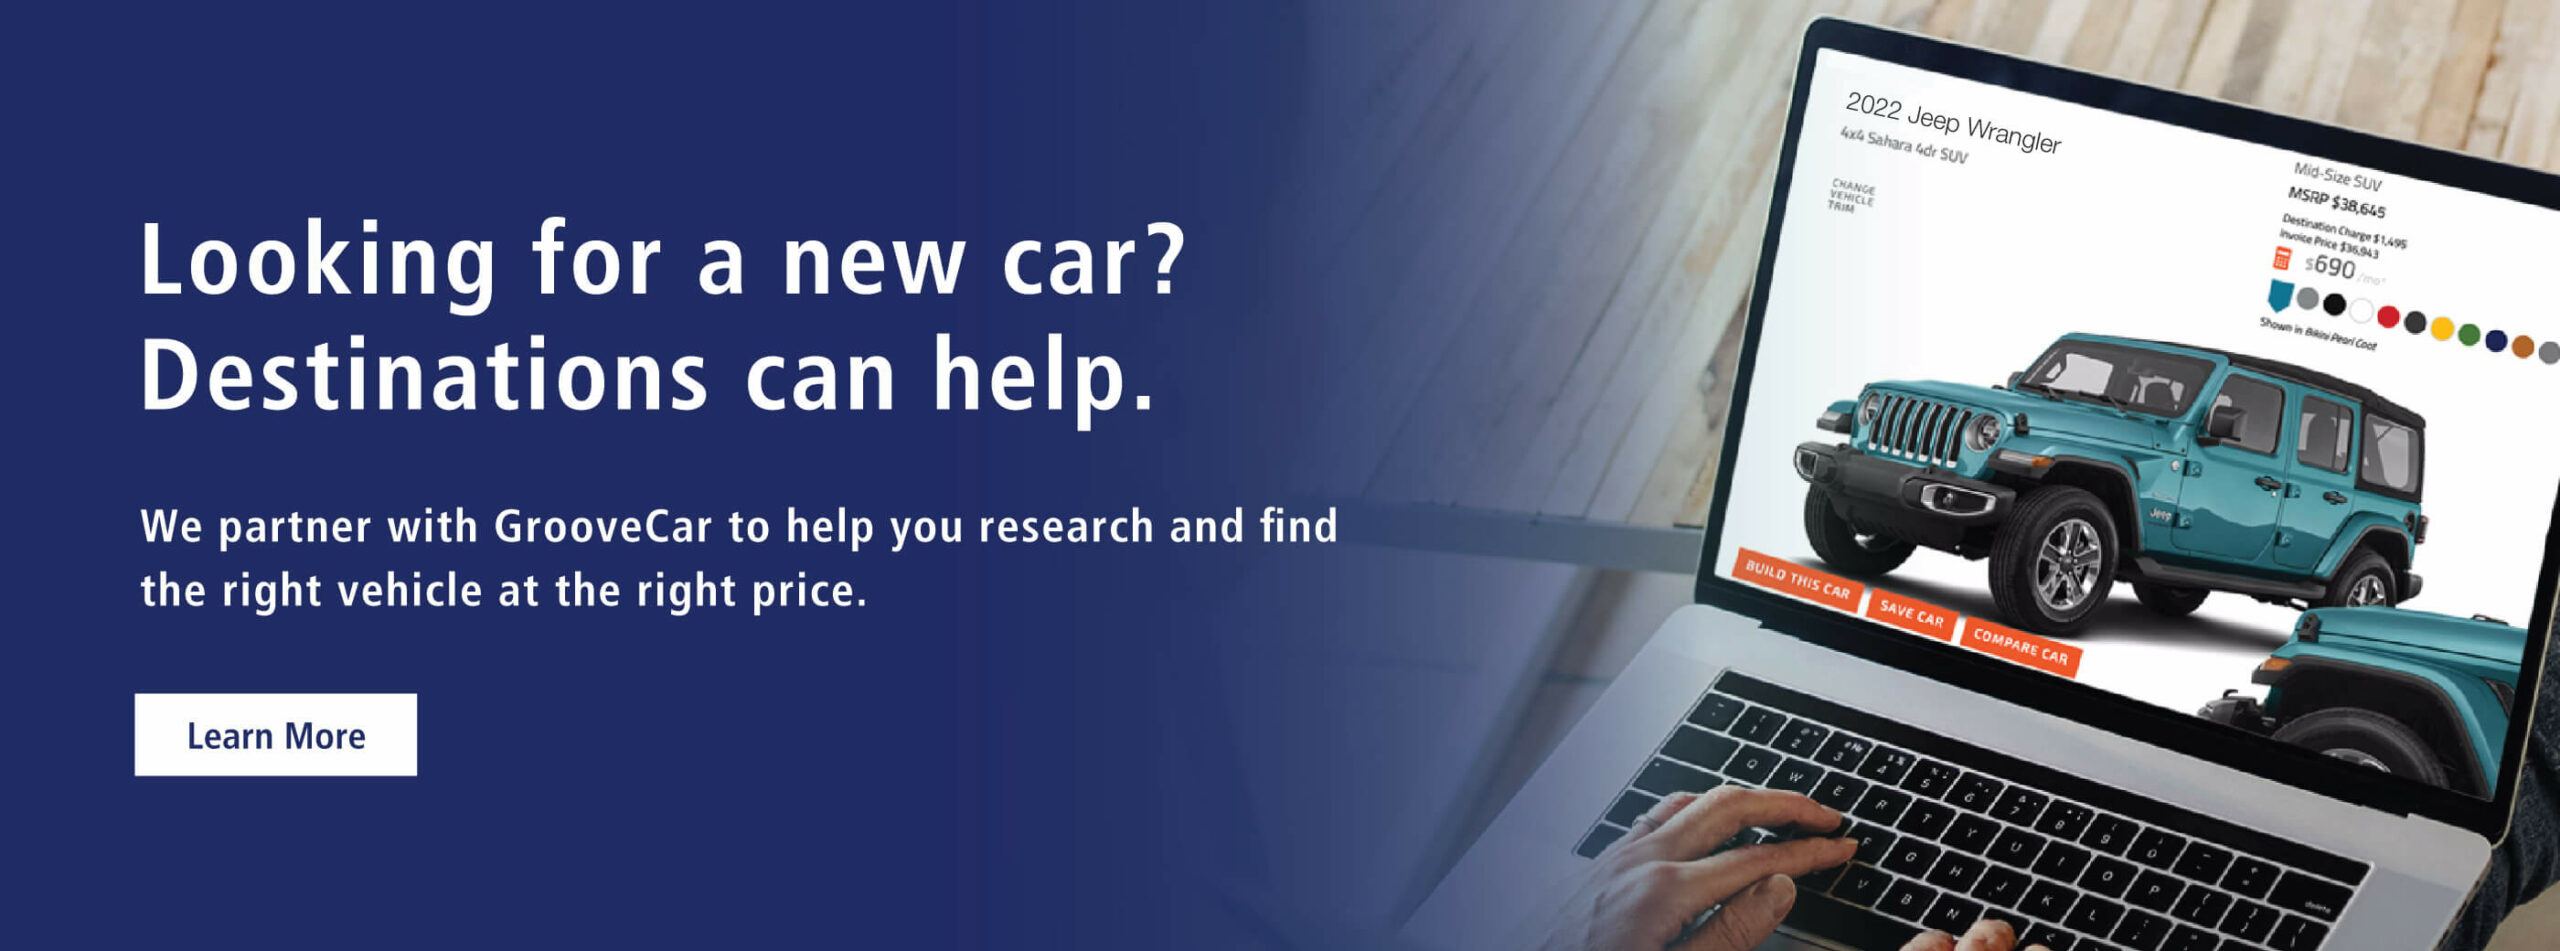 Looking for a new car? Destinations can help. Search online through GrooveCar.